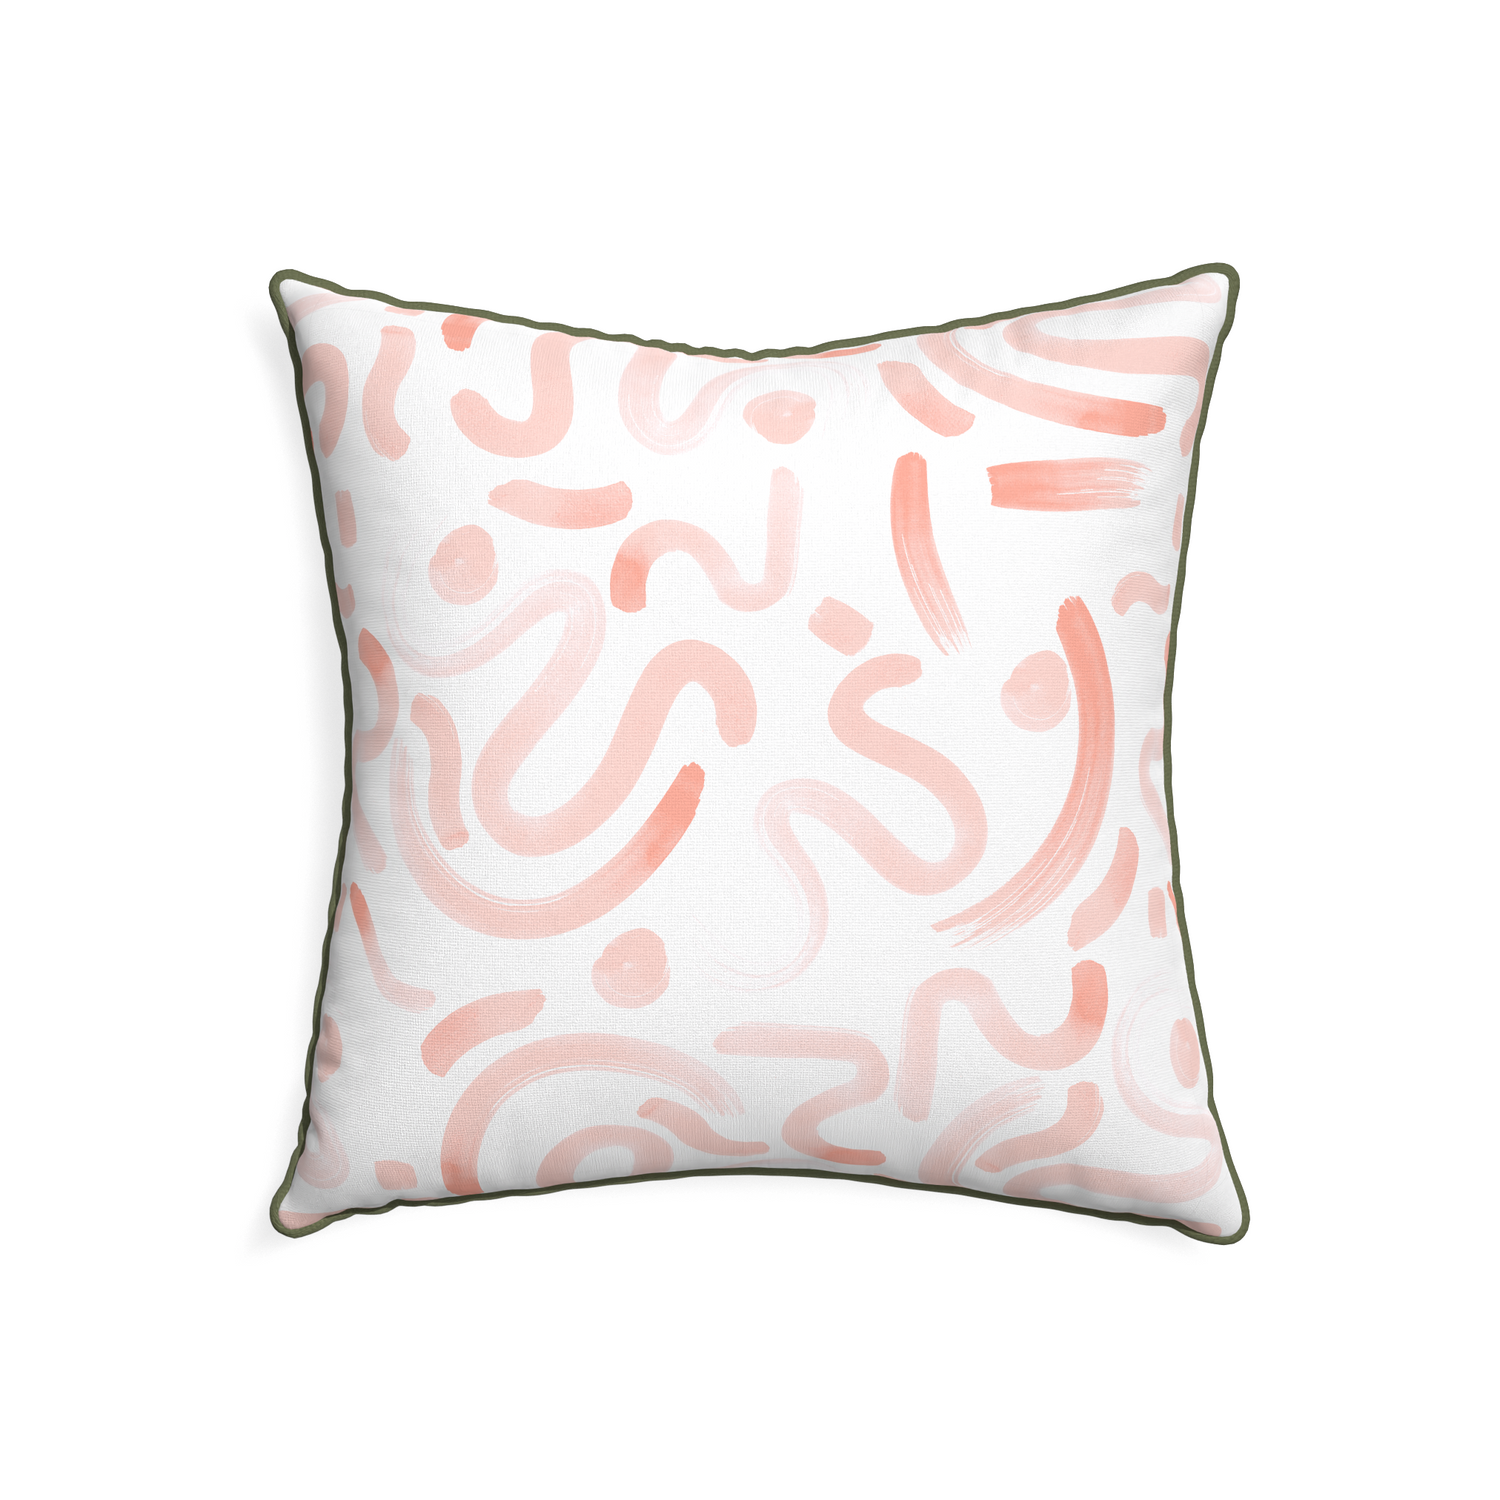 22-square hockney pink custom pink graphicpillow with f piping on white background